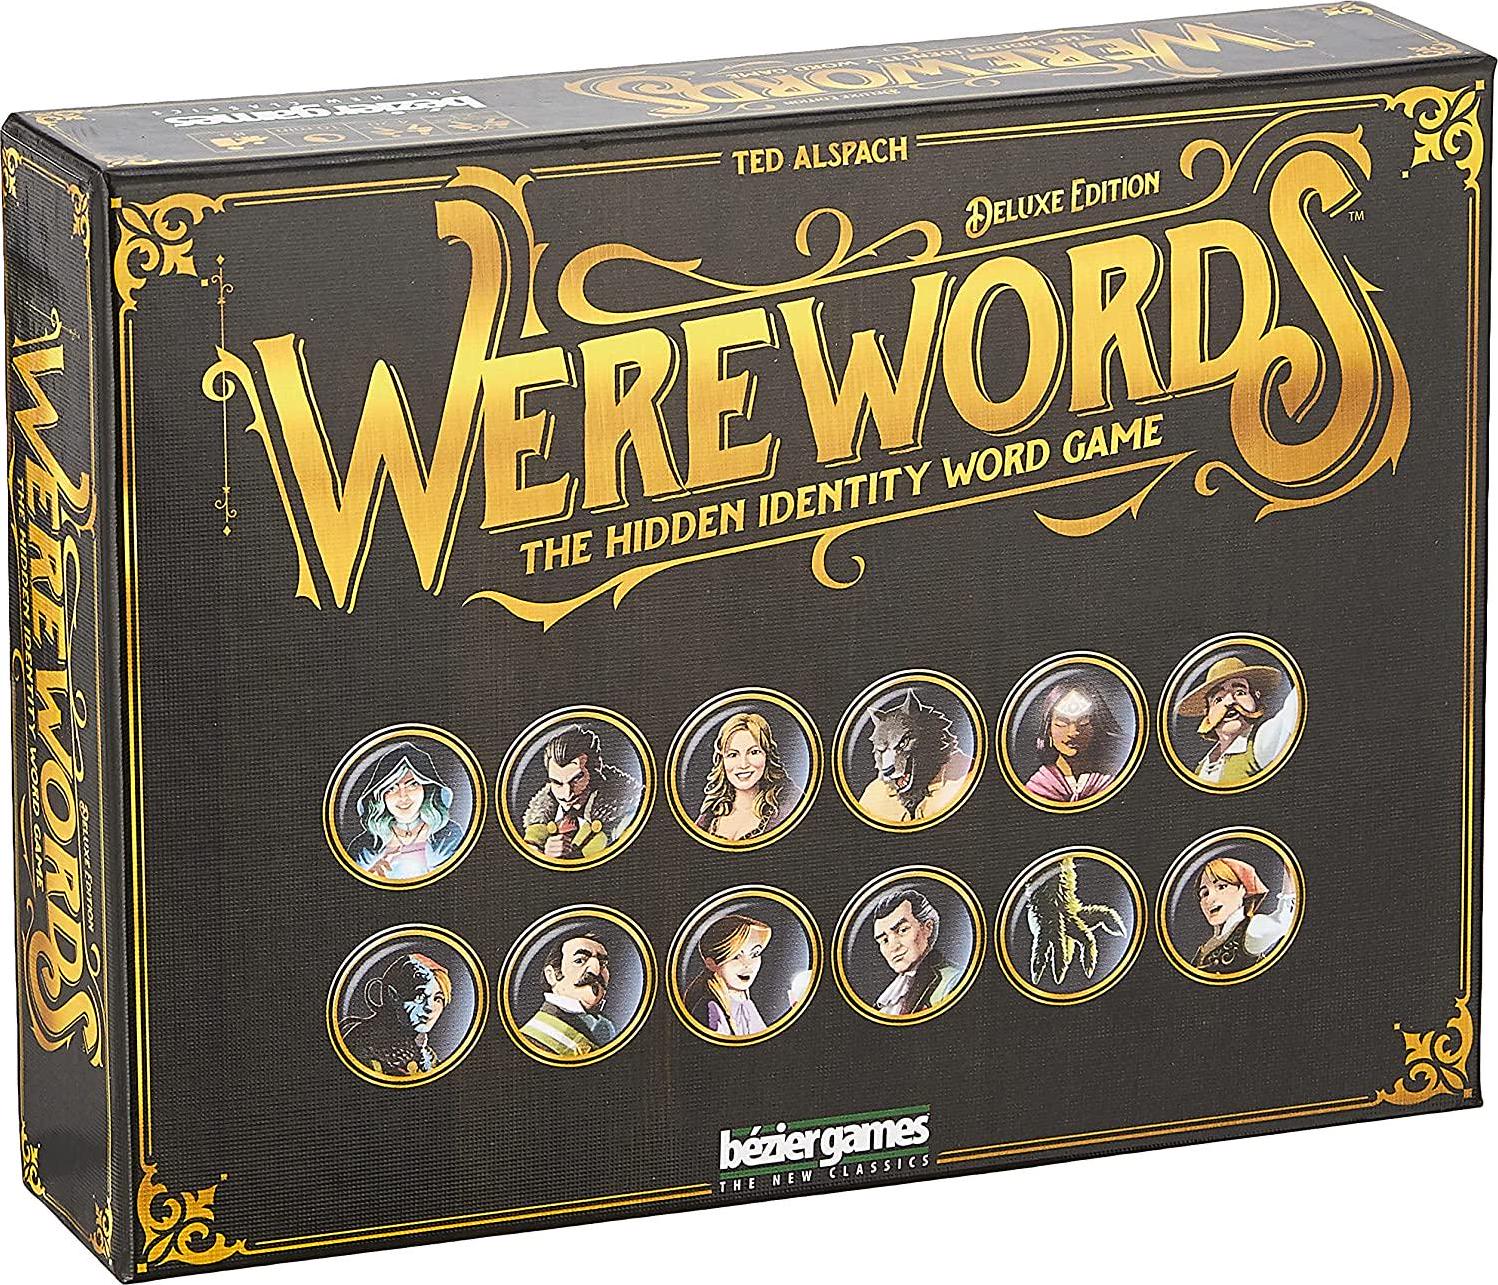 Lion Rampant, Lion Rampant Current Edition Werewords Deluxe Board Game